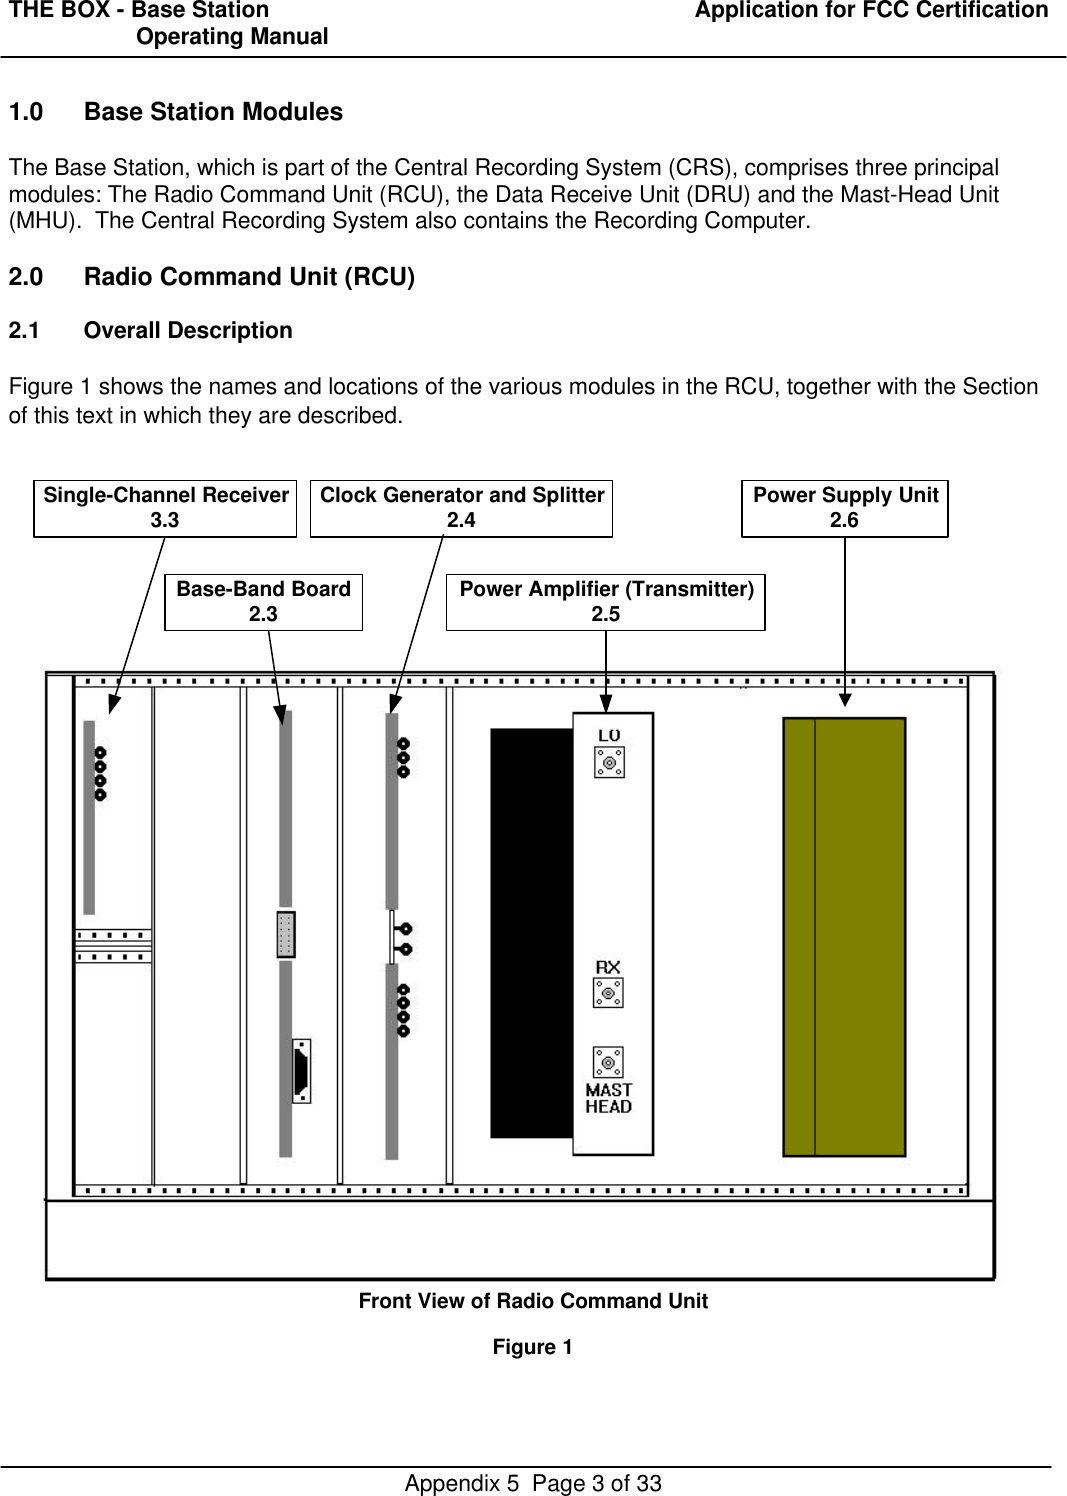 THE BOX - Base Station  Application for FCC Certification                    Operating ManualAppendix 5  Page 3 of 331.0 Base Station ModulesThe Base Station, which is part of the Central Recording System (CRS), comprises three principalmodules: The Radio Command Unit (RCU), the Data Receive Unit (DRU) and the Mast-Head Unit(MHU).  The Central Recording System also contains the Recording Computer.2.0 Radio Command Unit (RCU)2.1 Overall DescriptionFigure 1 shows the names and locations of the various modules in the RCU, together with the Sectionof this text in which they are described.Front View of Radio Command UnitFigure 1Single-Channel Receiver3.3Base-Band Board2.3Clock Generator and Splitter2.4Power Amplifier (Transmitter)2.5Power Supply Unit2.6